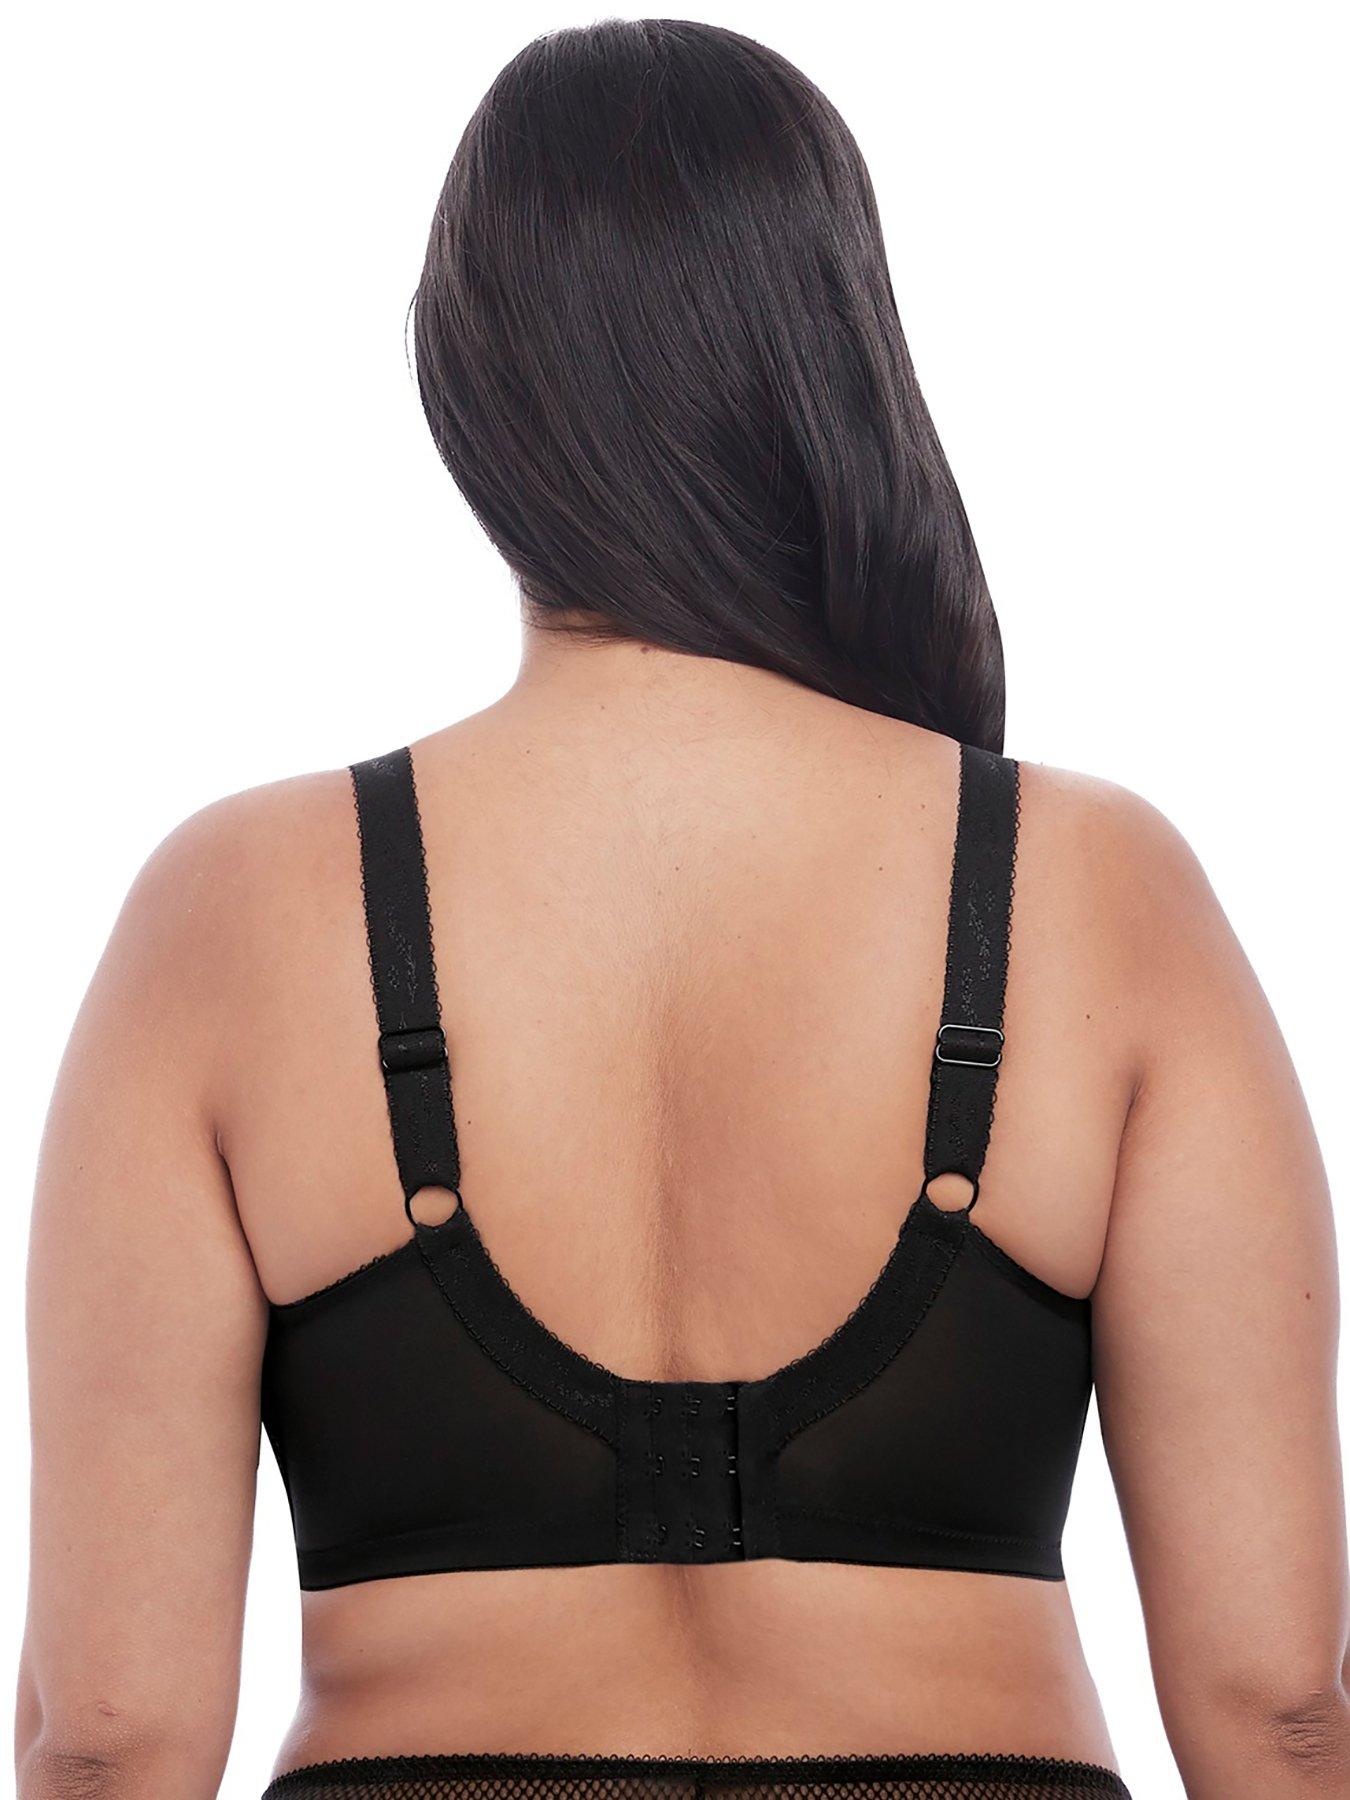 Elomi Charley Underwired Bandless Spacer Moulded Bra - Black